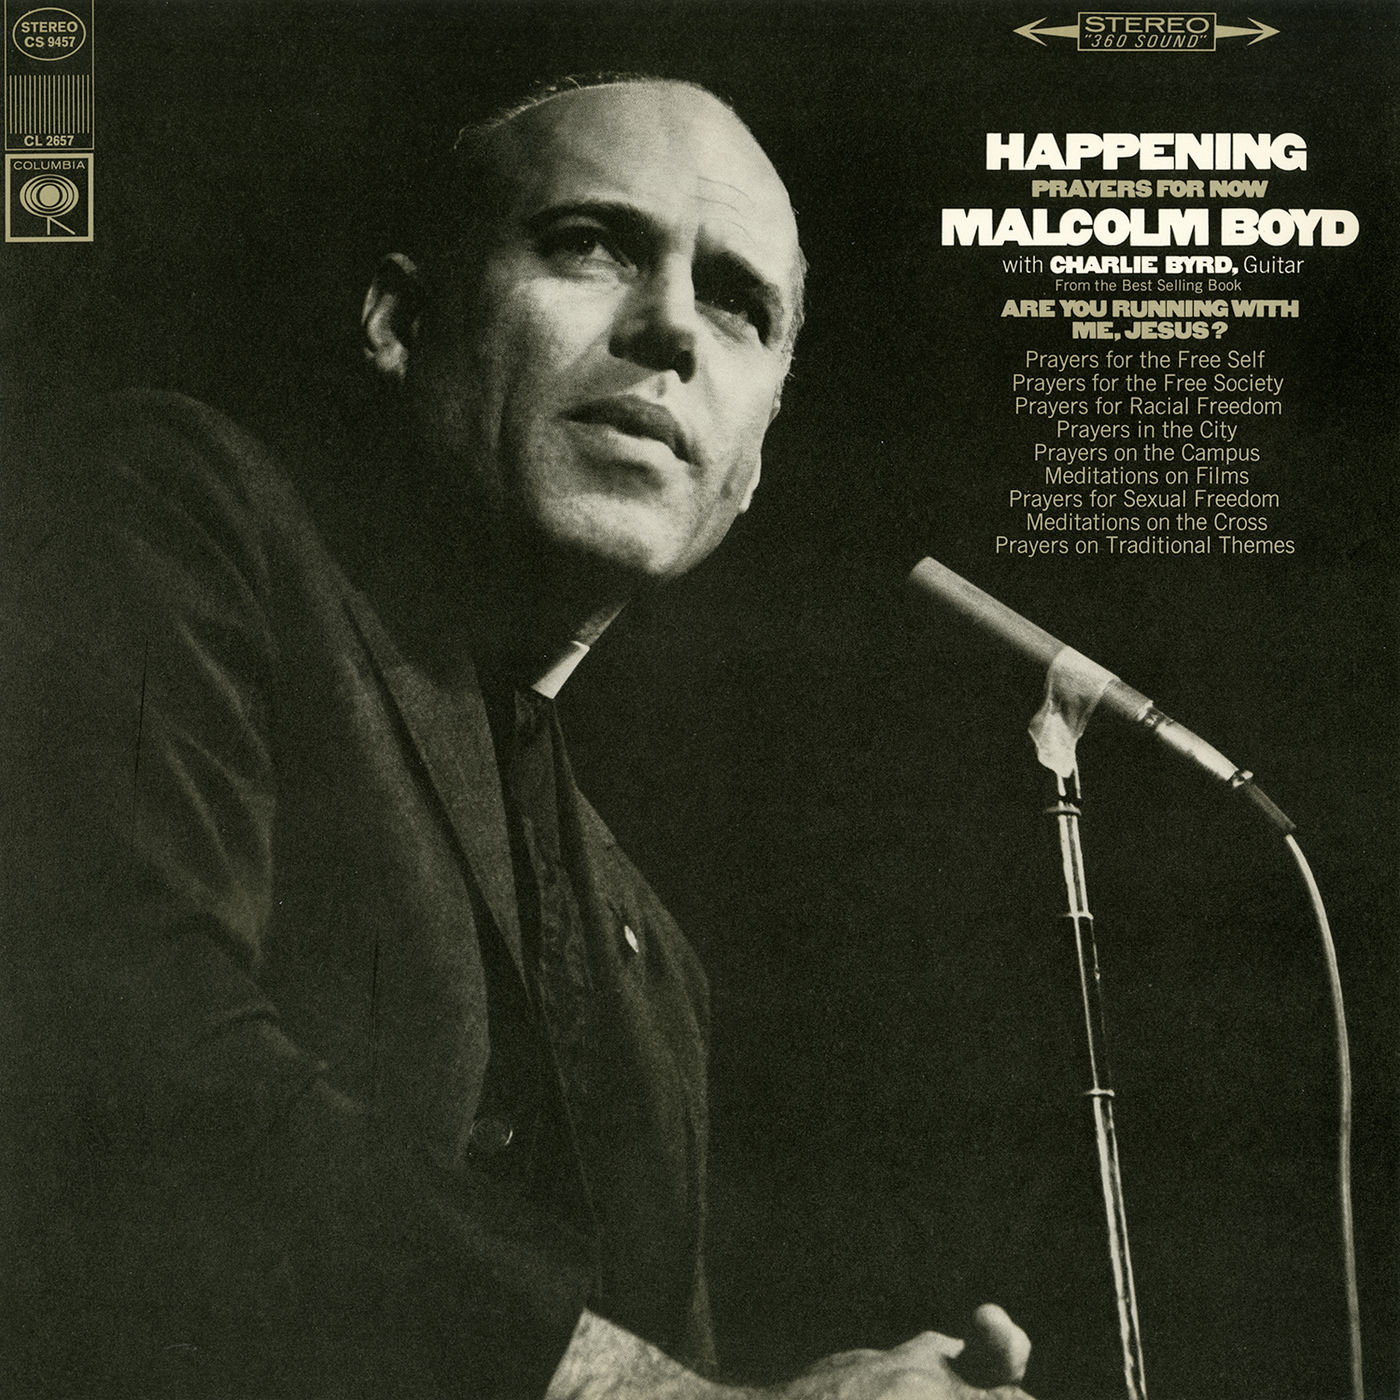 Malcolm Boyd – Happening – Prayers For Now (with Charlie Byrd) (1965/2017) [FLAC 24bit/192kHz]